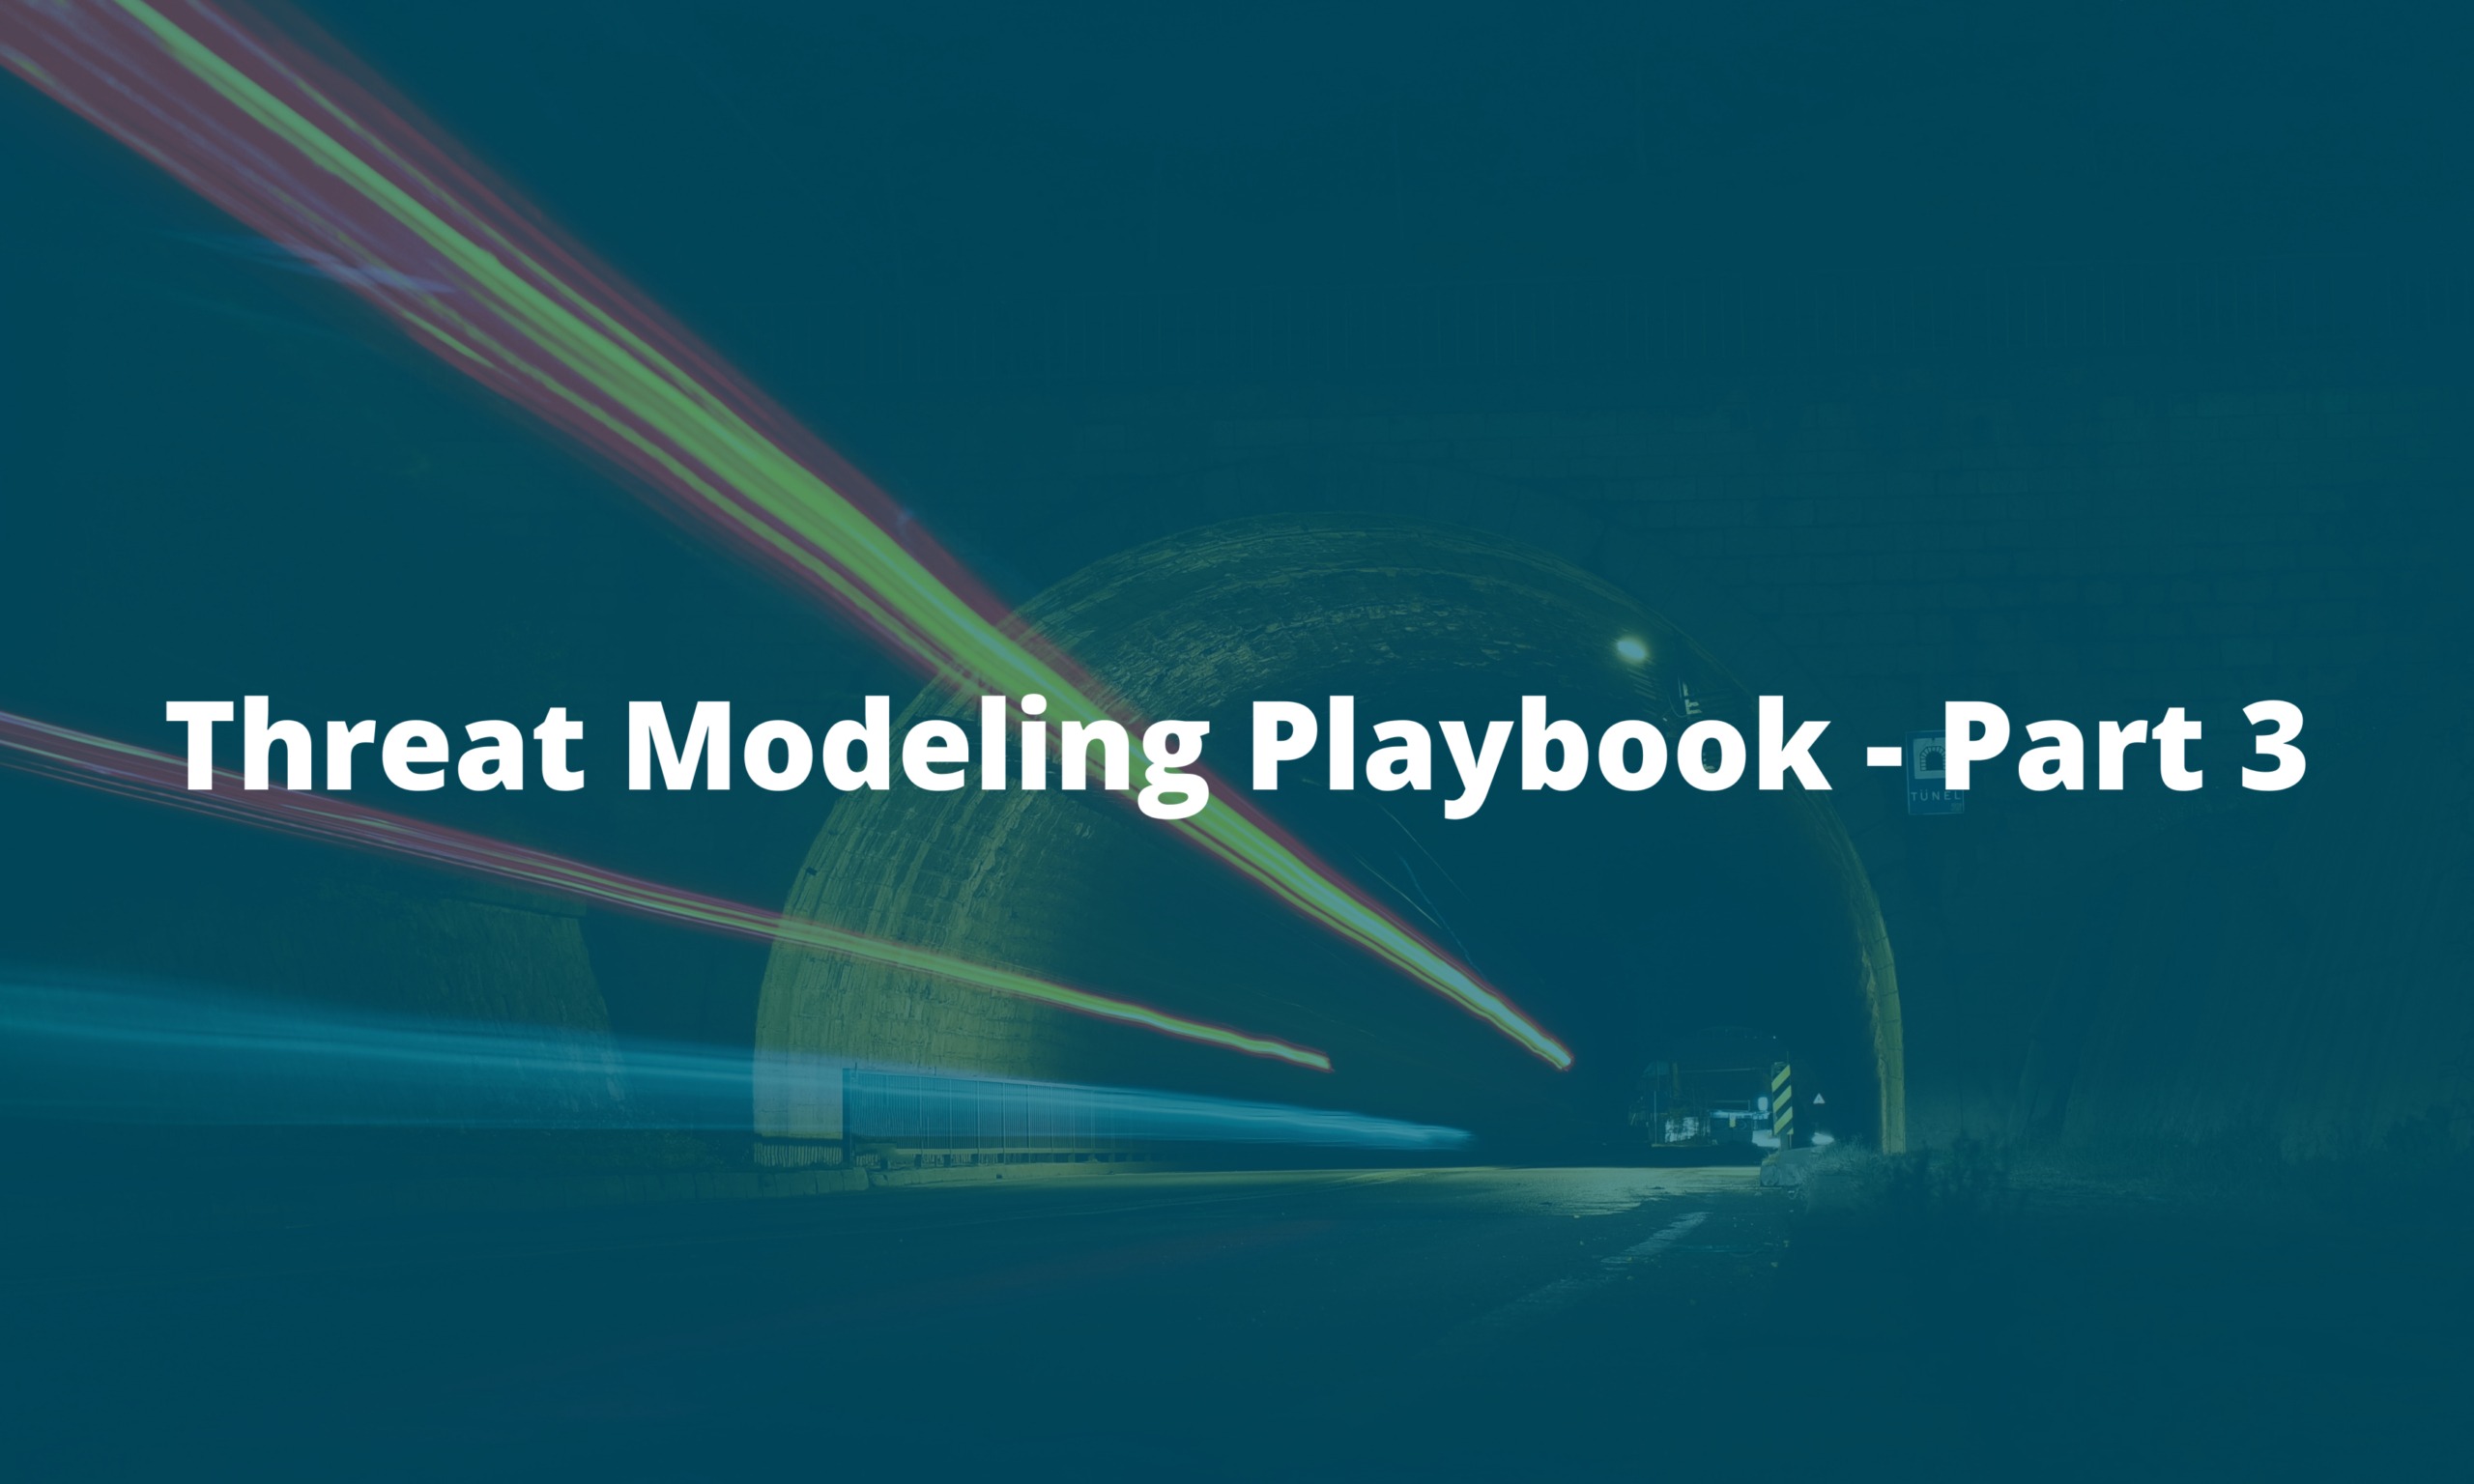 Threat Modeling Playbook Part 3